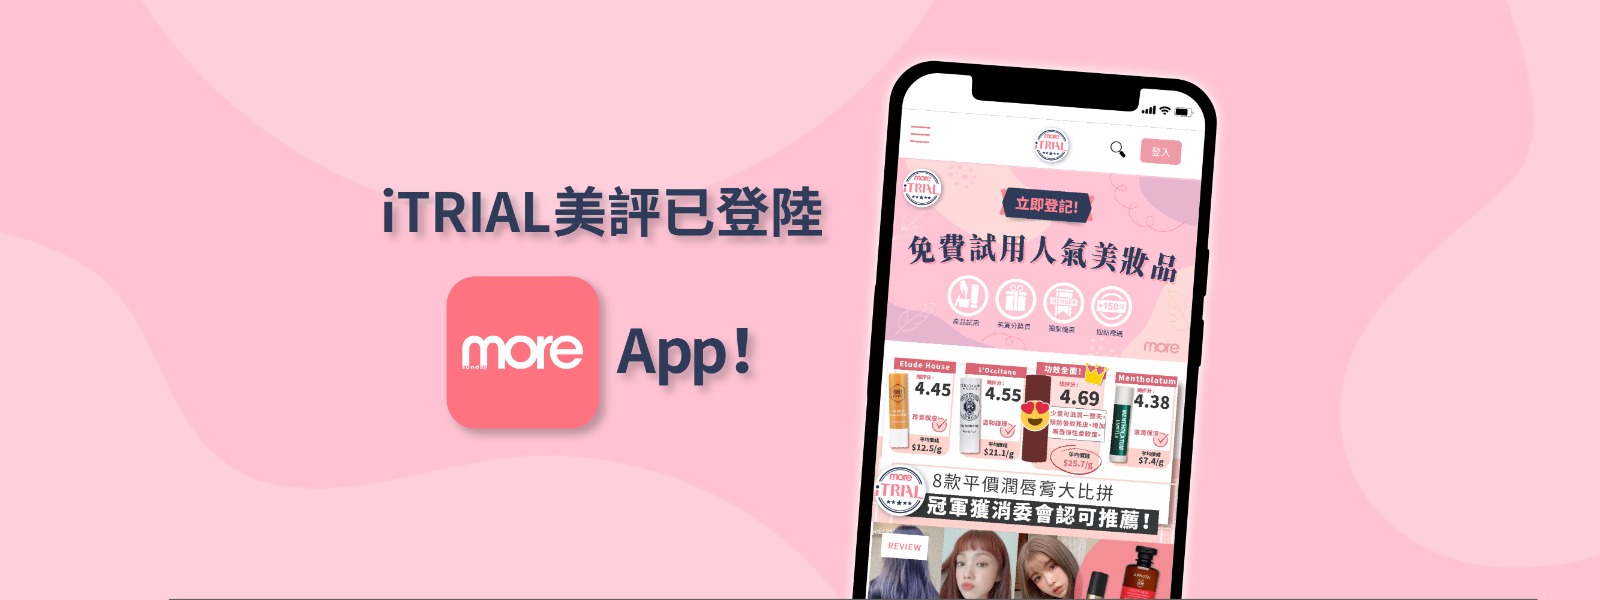 test iTRIAL 已登陸more App喇！